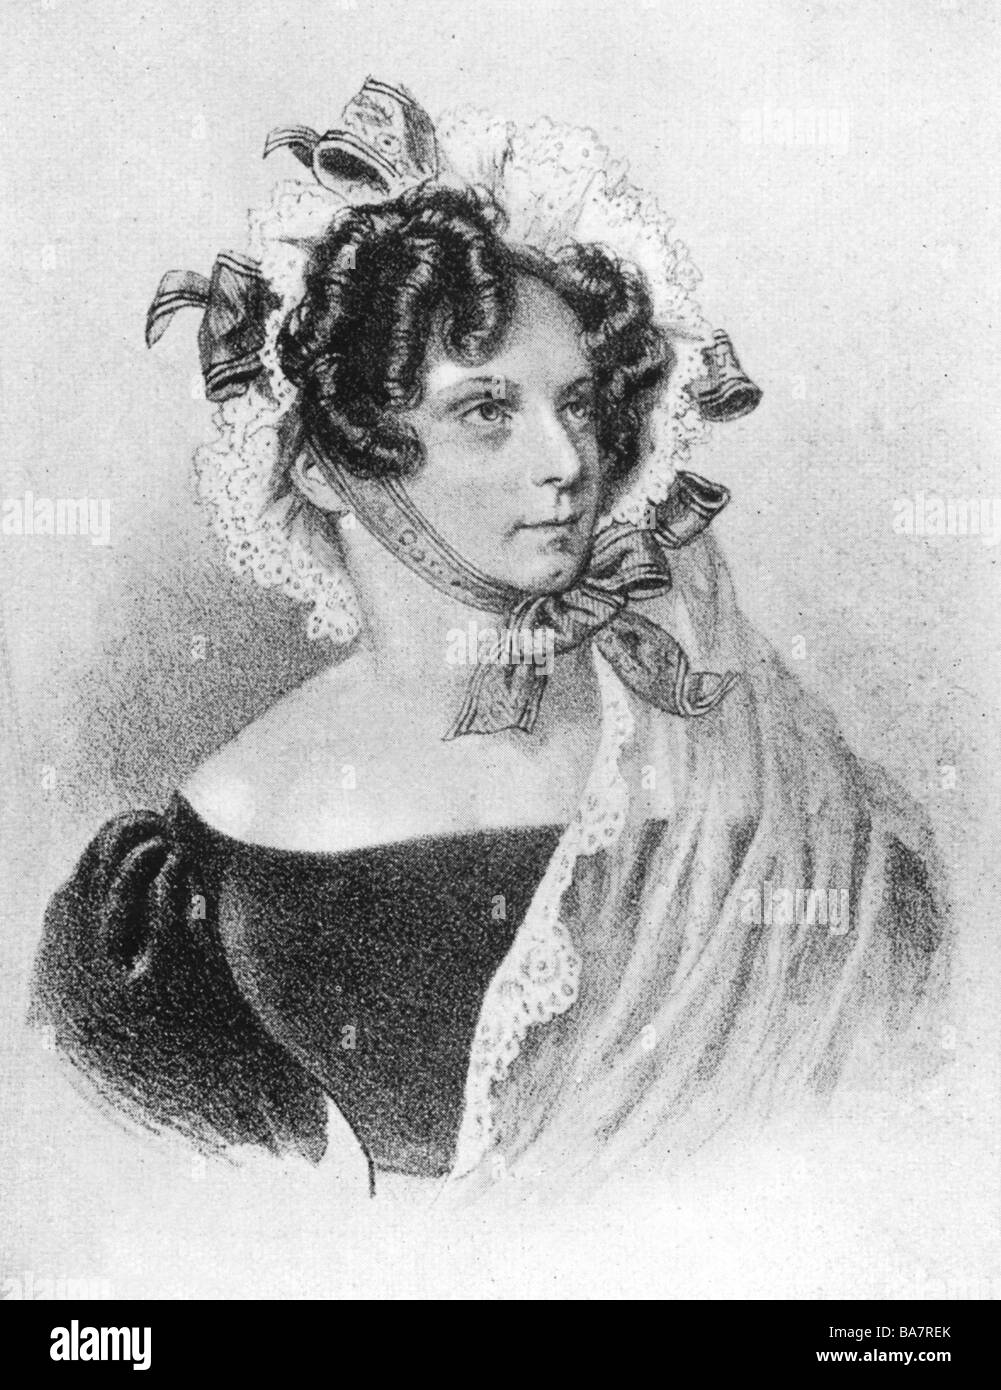 Schroeder, Sophie, 1.3.1781 - 25.2.1868, German actress, portrait, after lithograph by Josef Kriehuber, 1828, Stock Photo